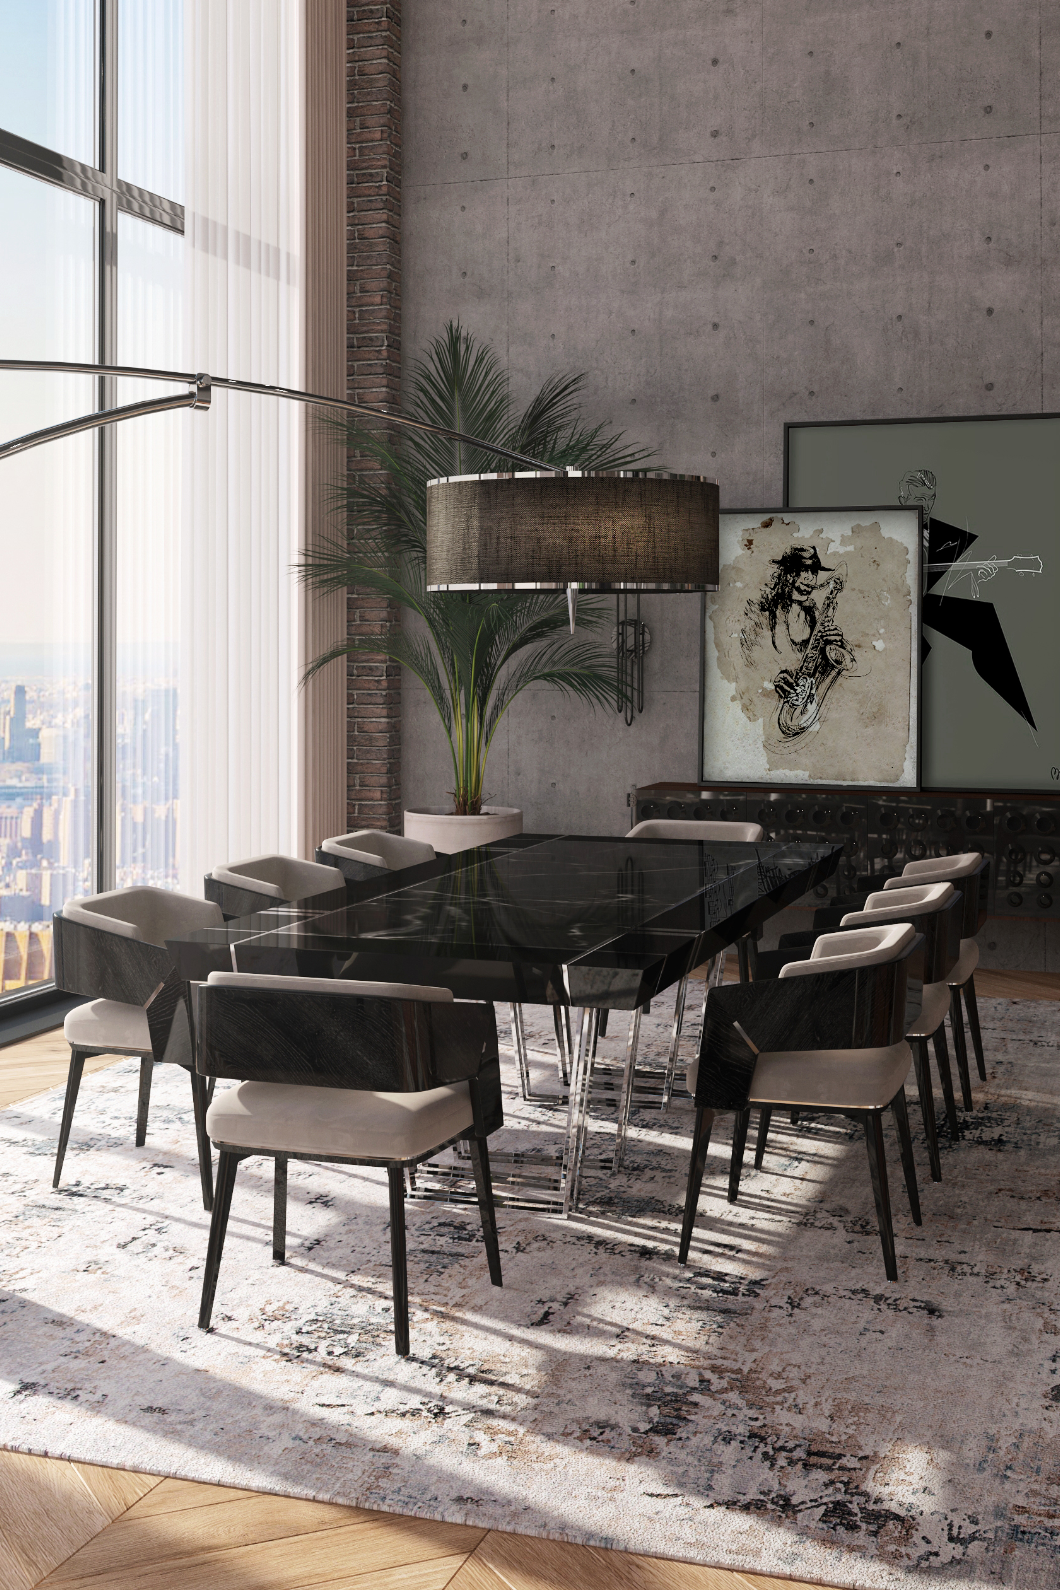 Galea II Dining Chair: Discovering The Versatility Of LUXXU'S Prime Design